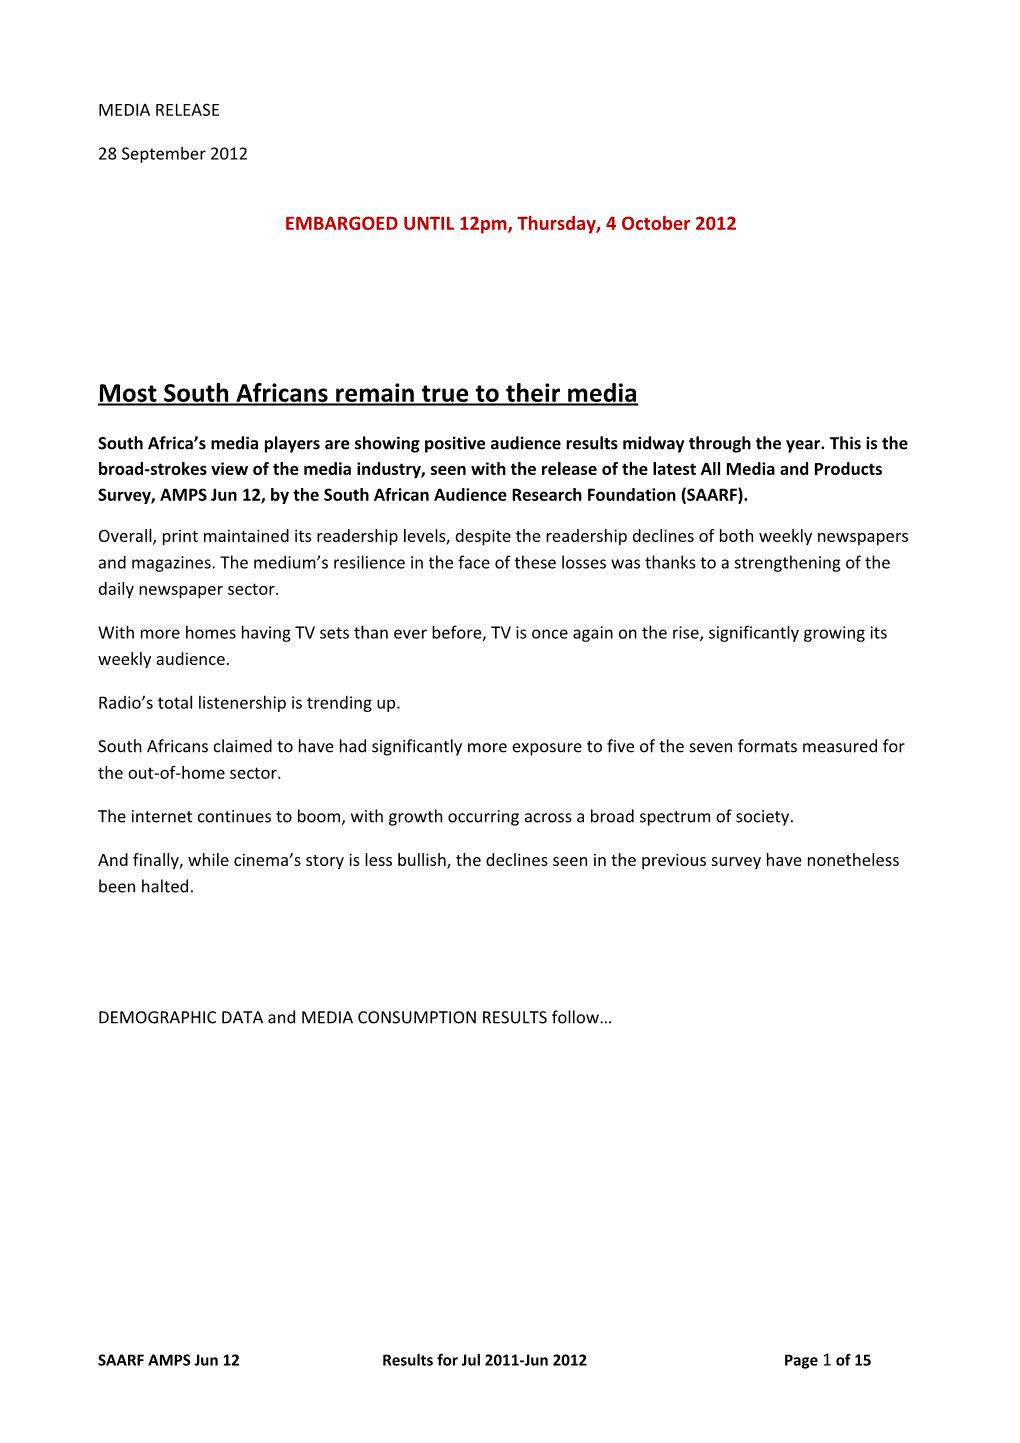 Most South Africans Remain True to Their Media